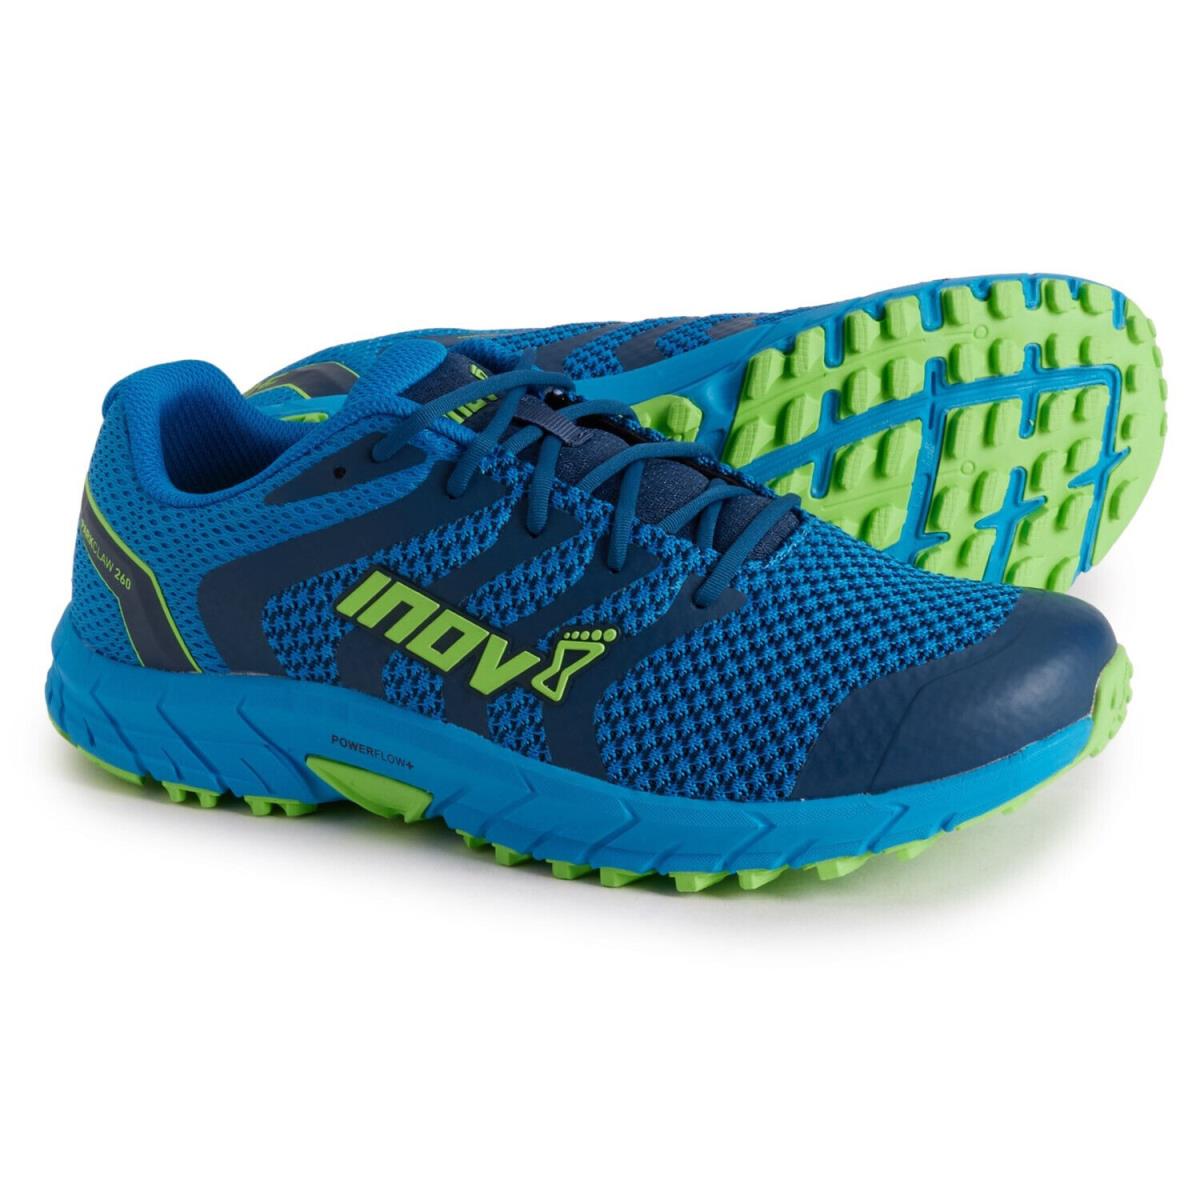 Inov-8 Men`s Parkclaw 260 Knit US 15 M Blue Synthetic Mesh Running Shoes - Blue